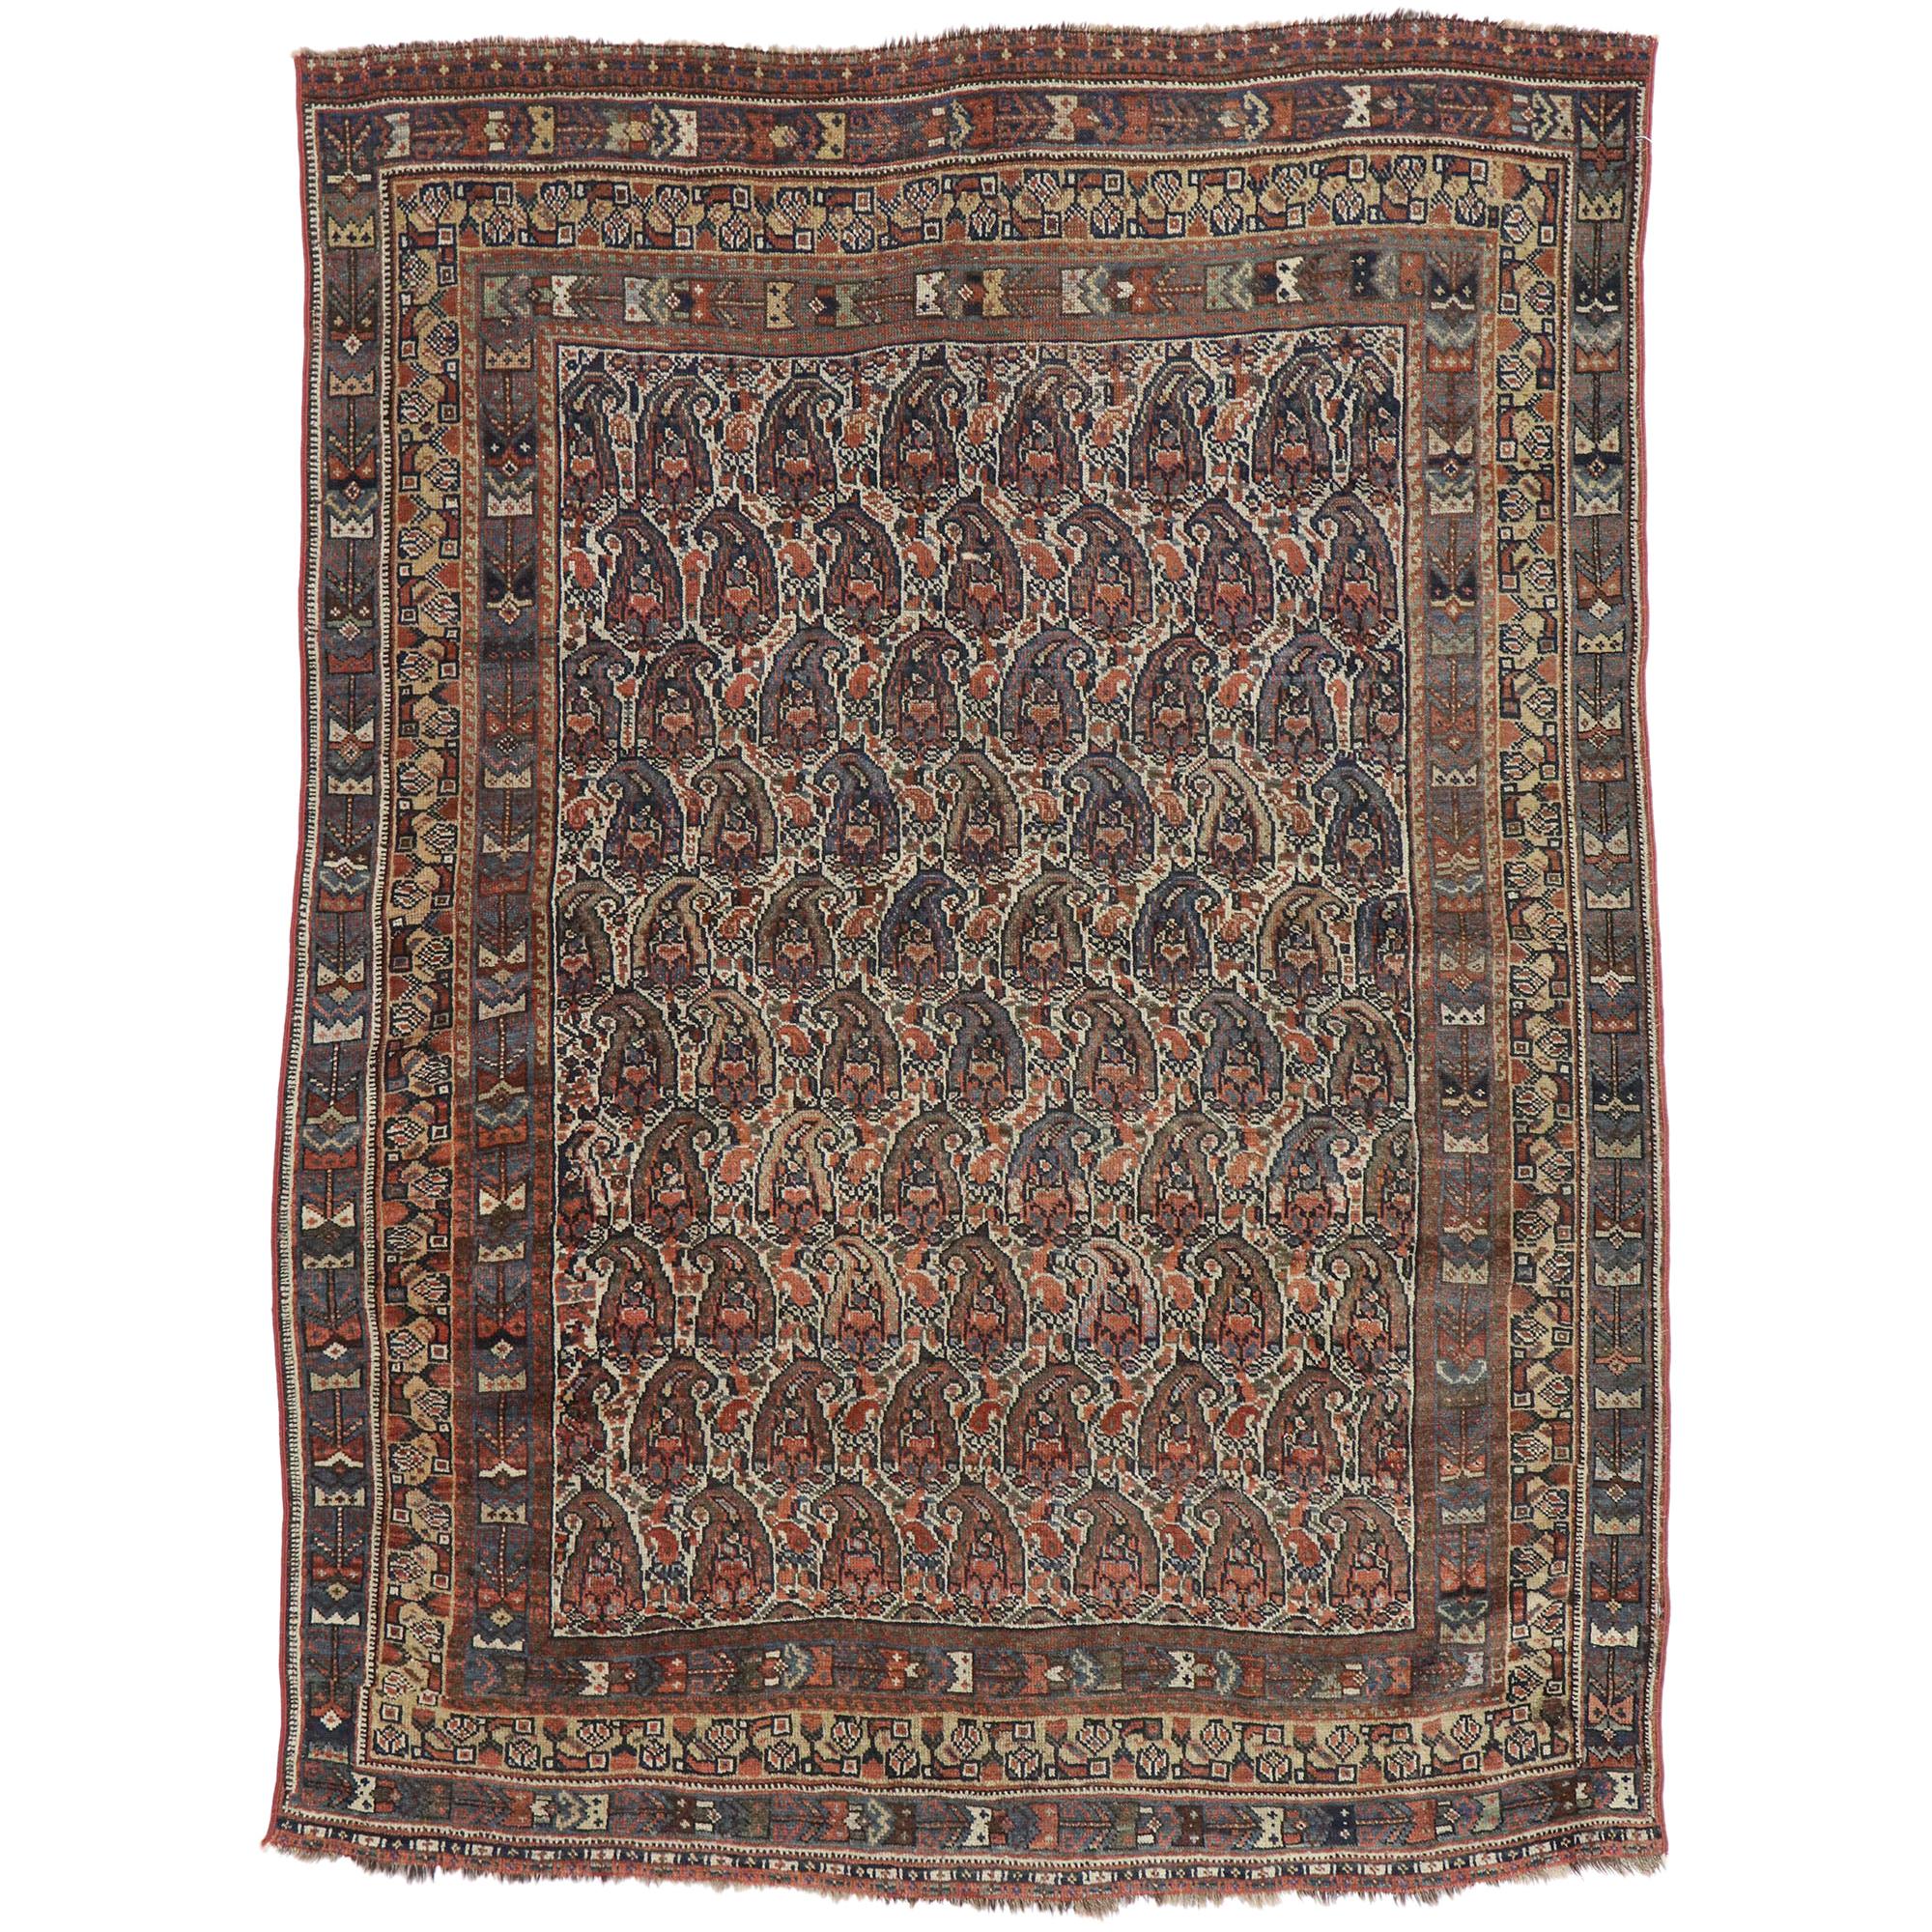 Distressed Antique Persian Shiraz Rug with Boteh Pattern and Modern Rustic Style